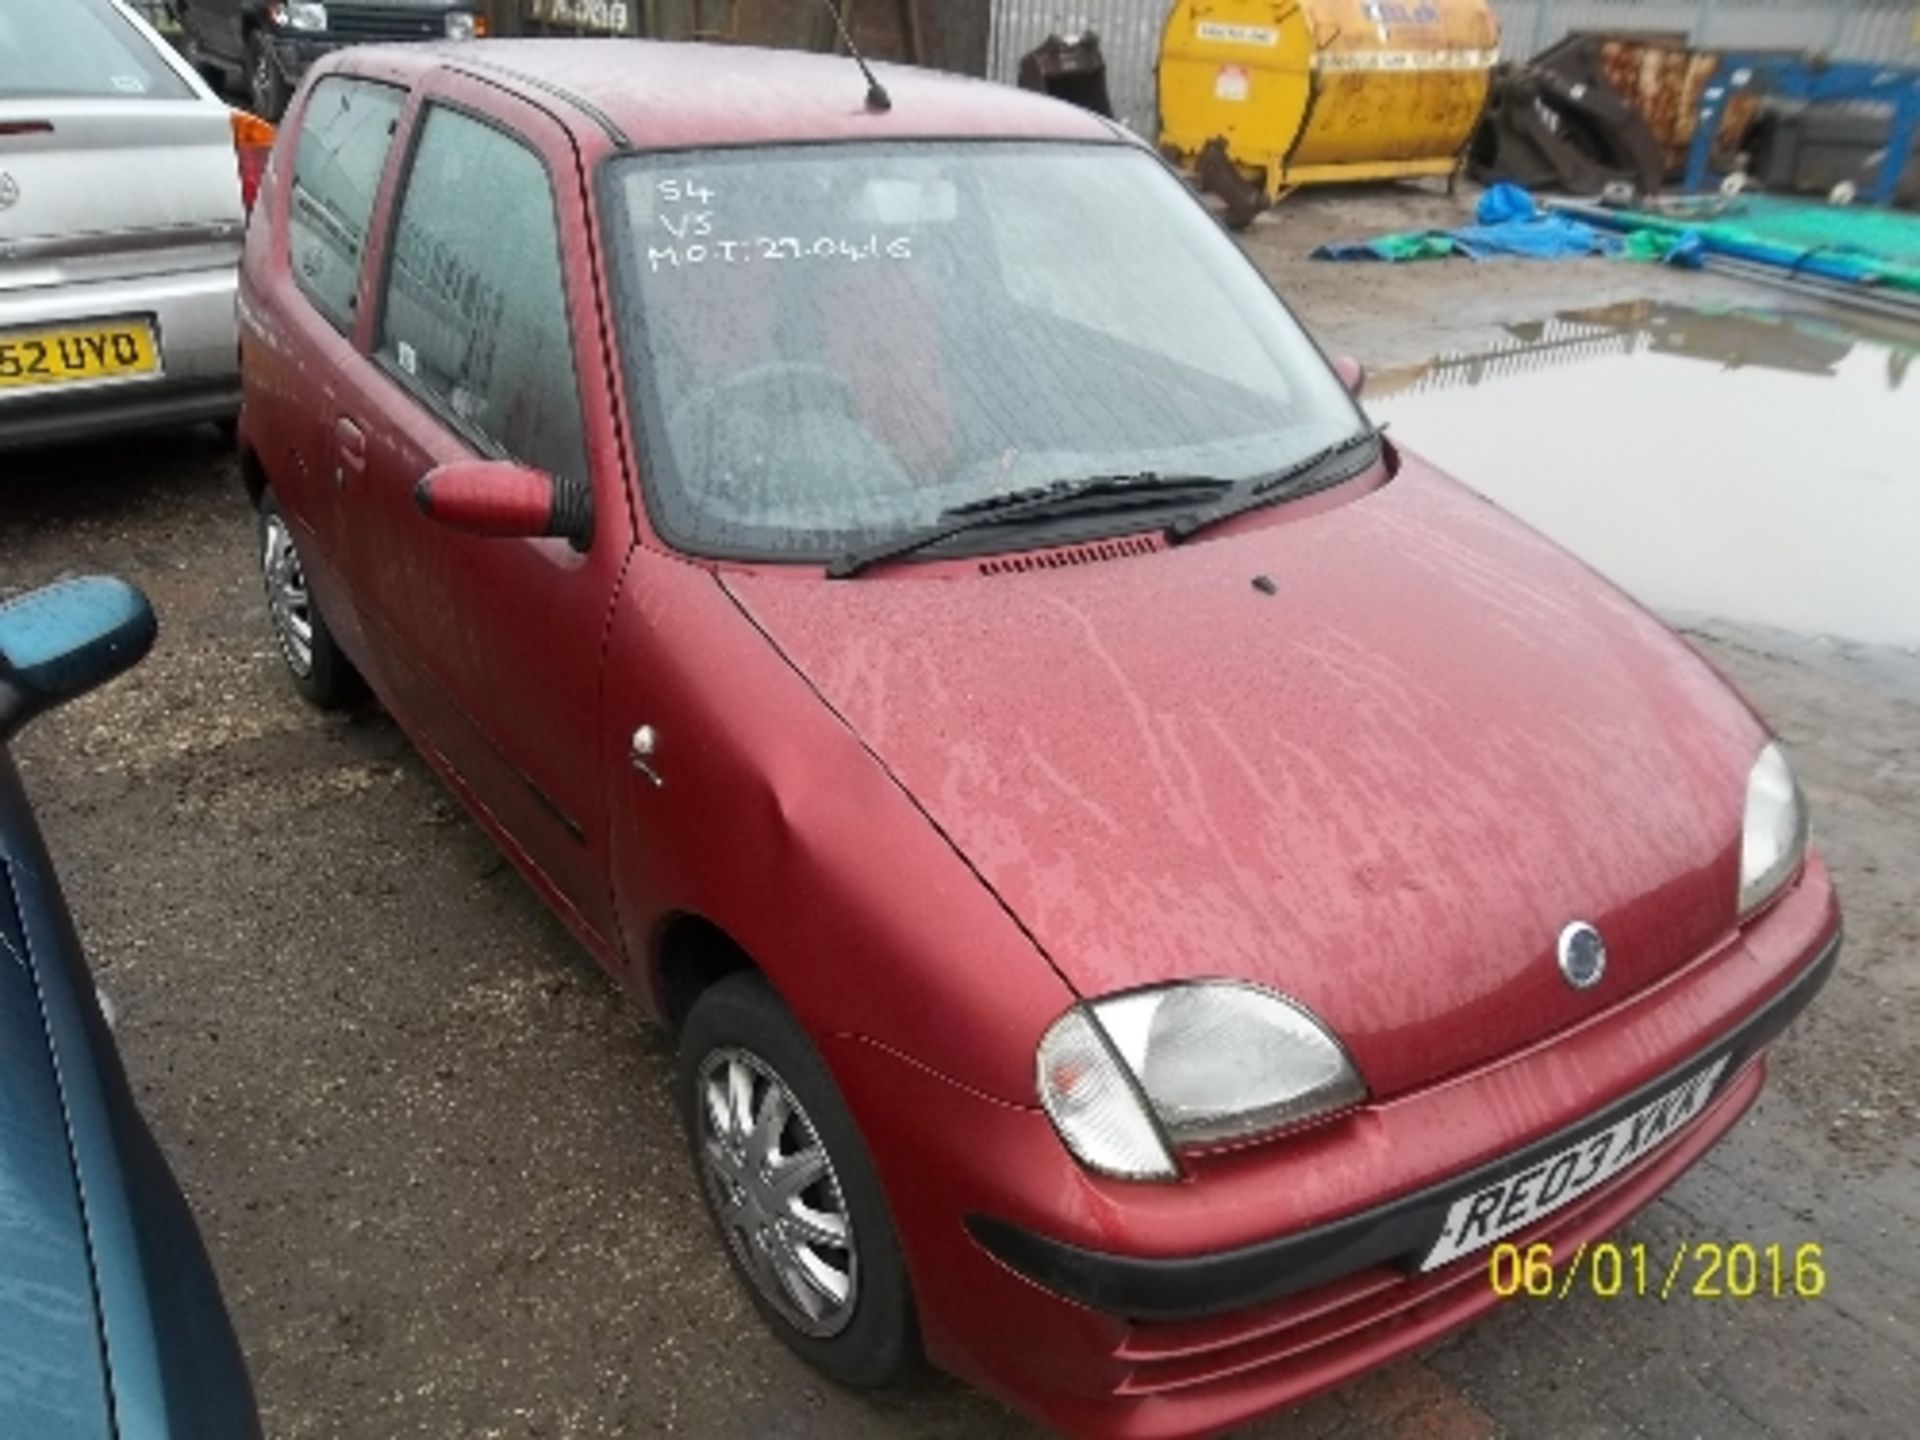 Fiat Seicento Active - RE03 XKK Date of registration:  28.03.2003 1108cc, petrol, manual, red - Image 2 of 4